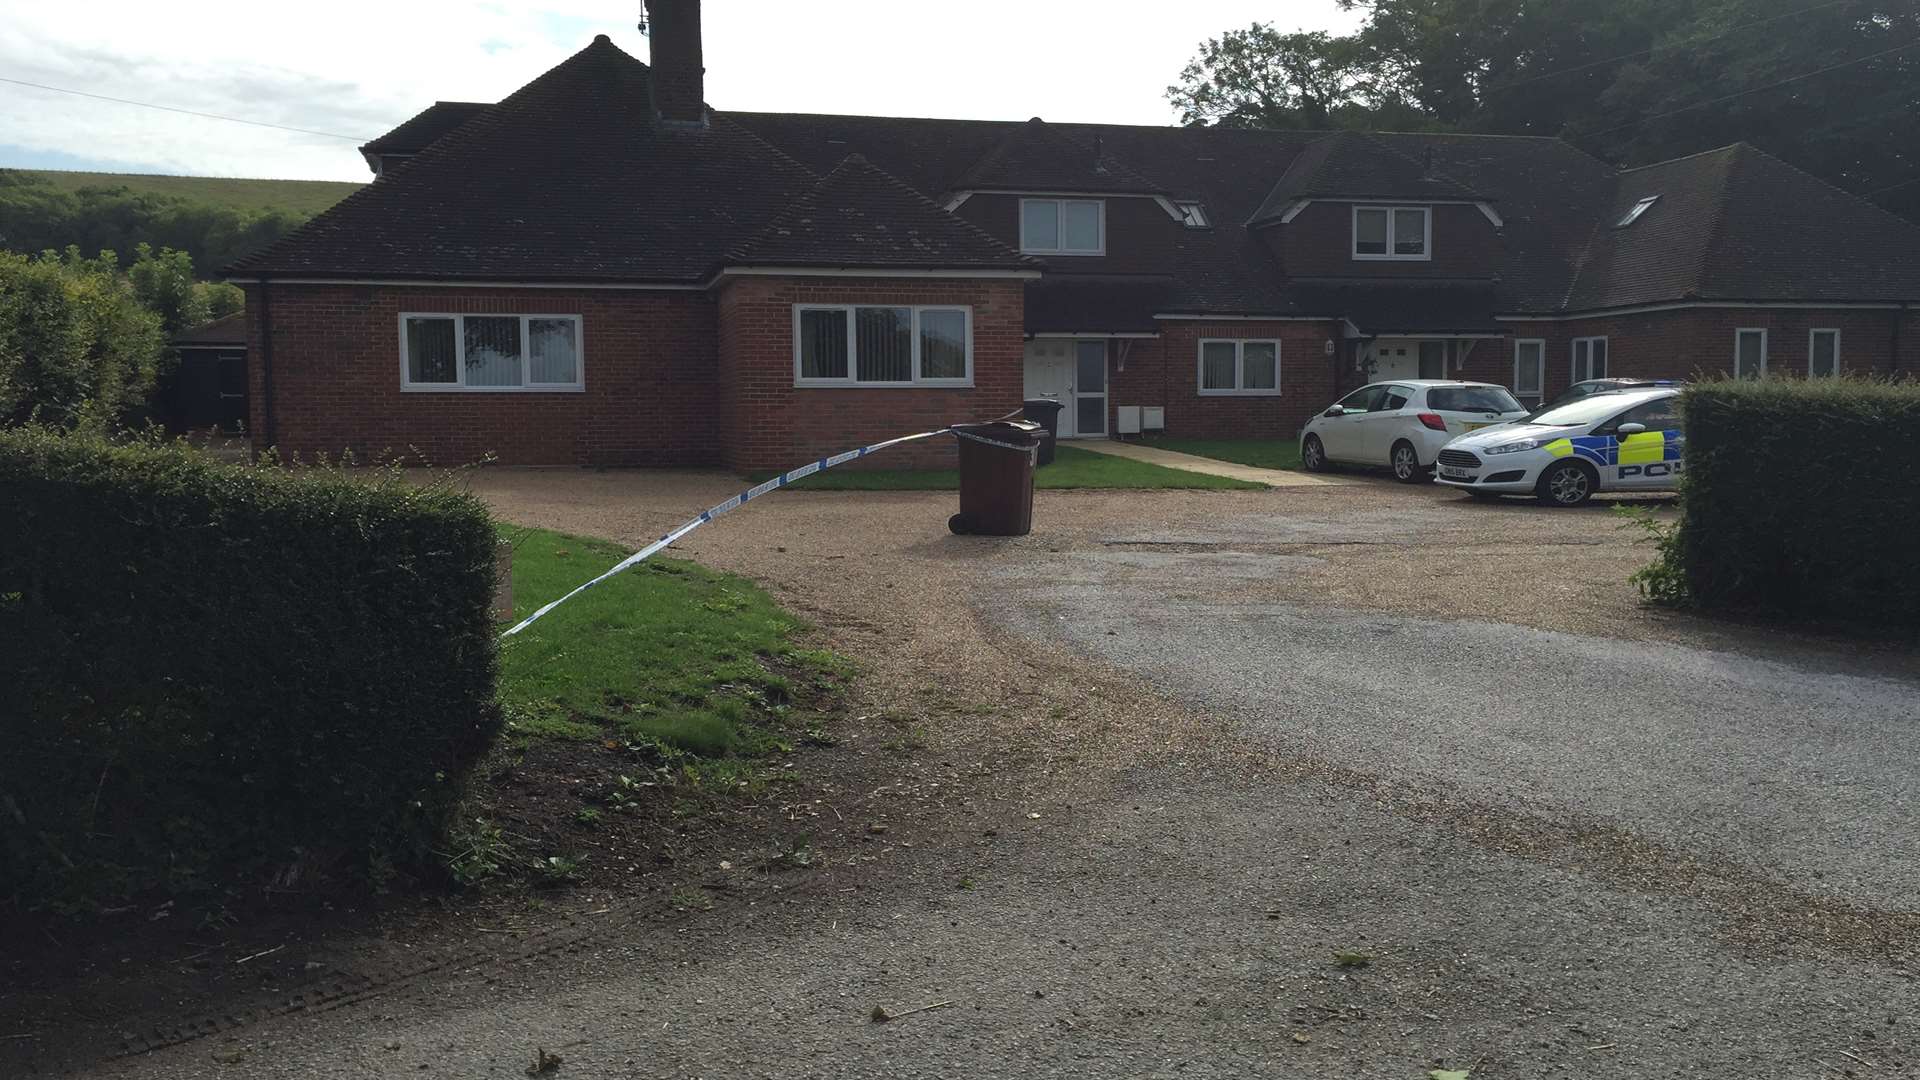 Police cordoned off the house following the stabbing